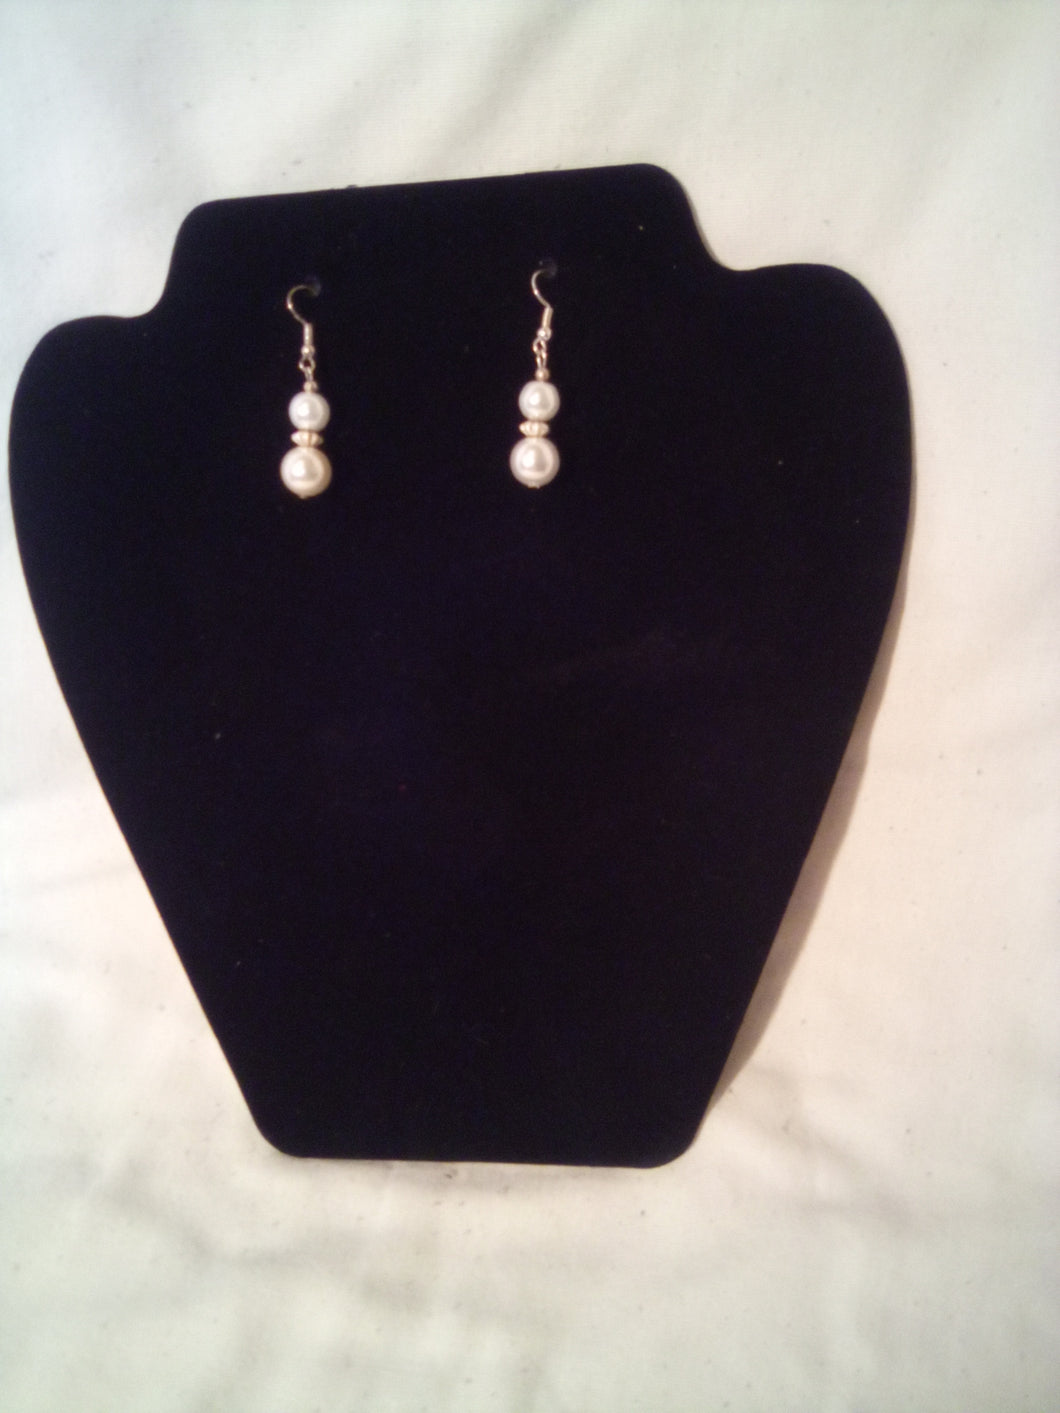 Glass pearls with silver bead accents earrings